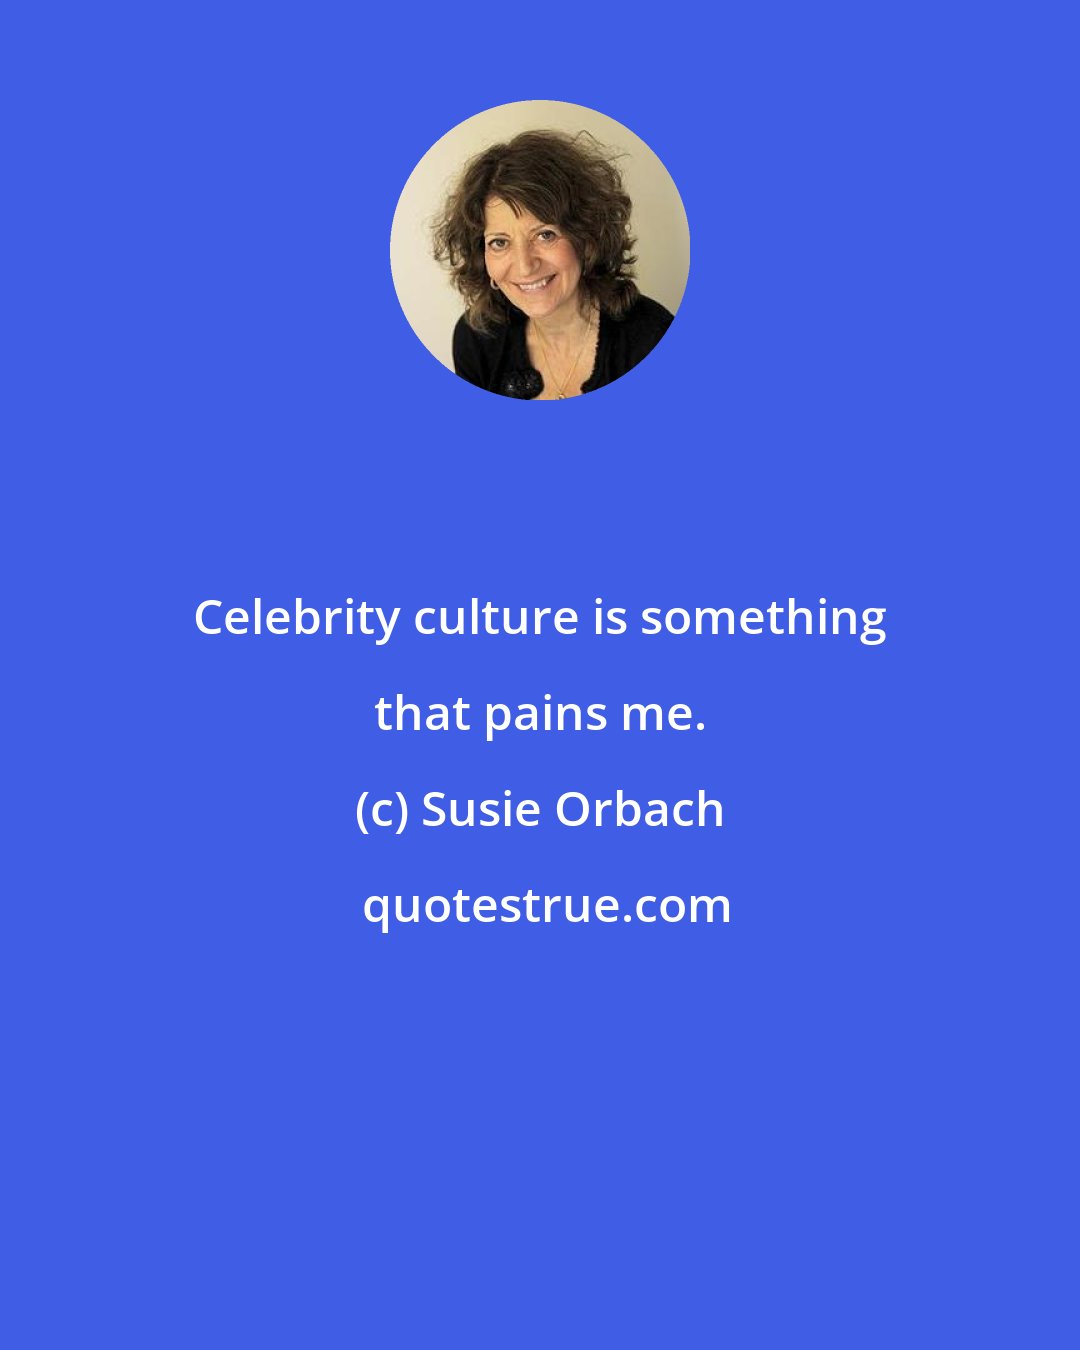 Susie Orbach: Celebrity culture is something that pains me.